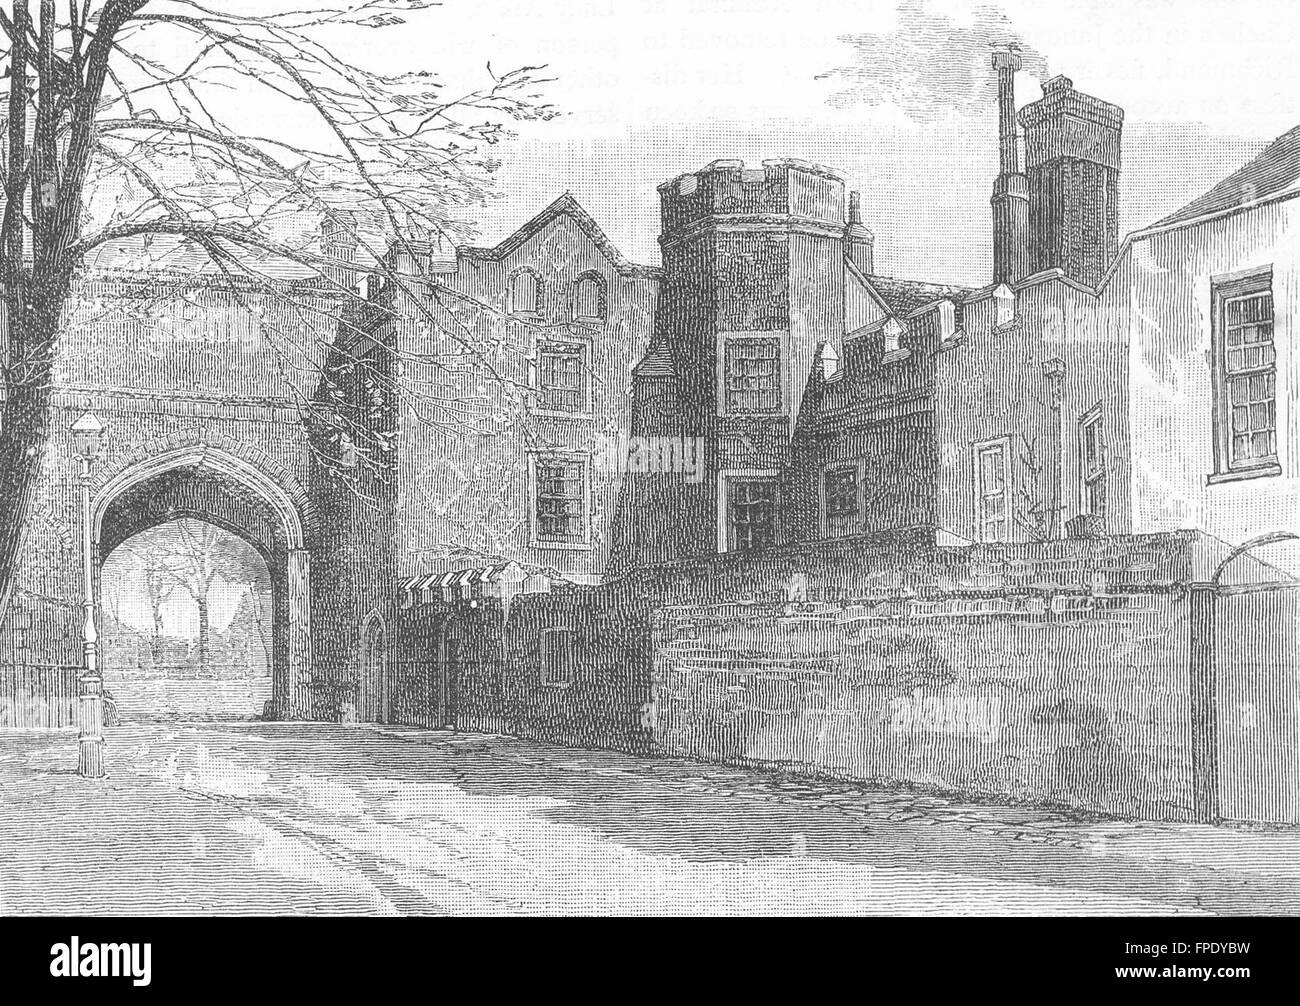 RICHMOND: Remains of the old palace, Richmond, antique print 1888 Stock Photo